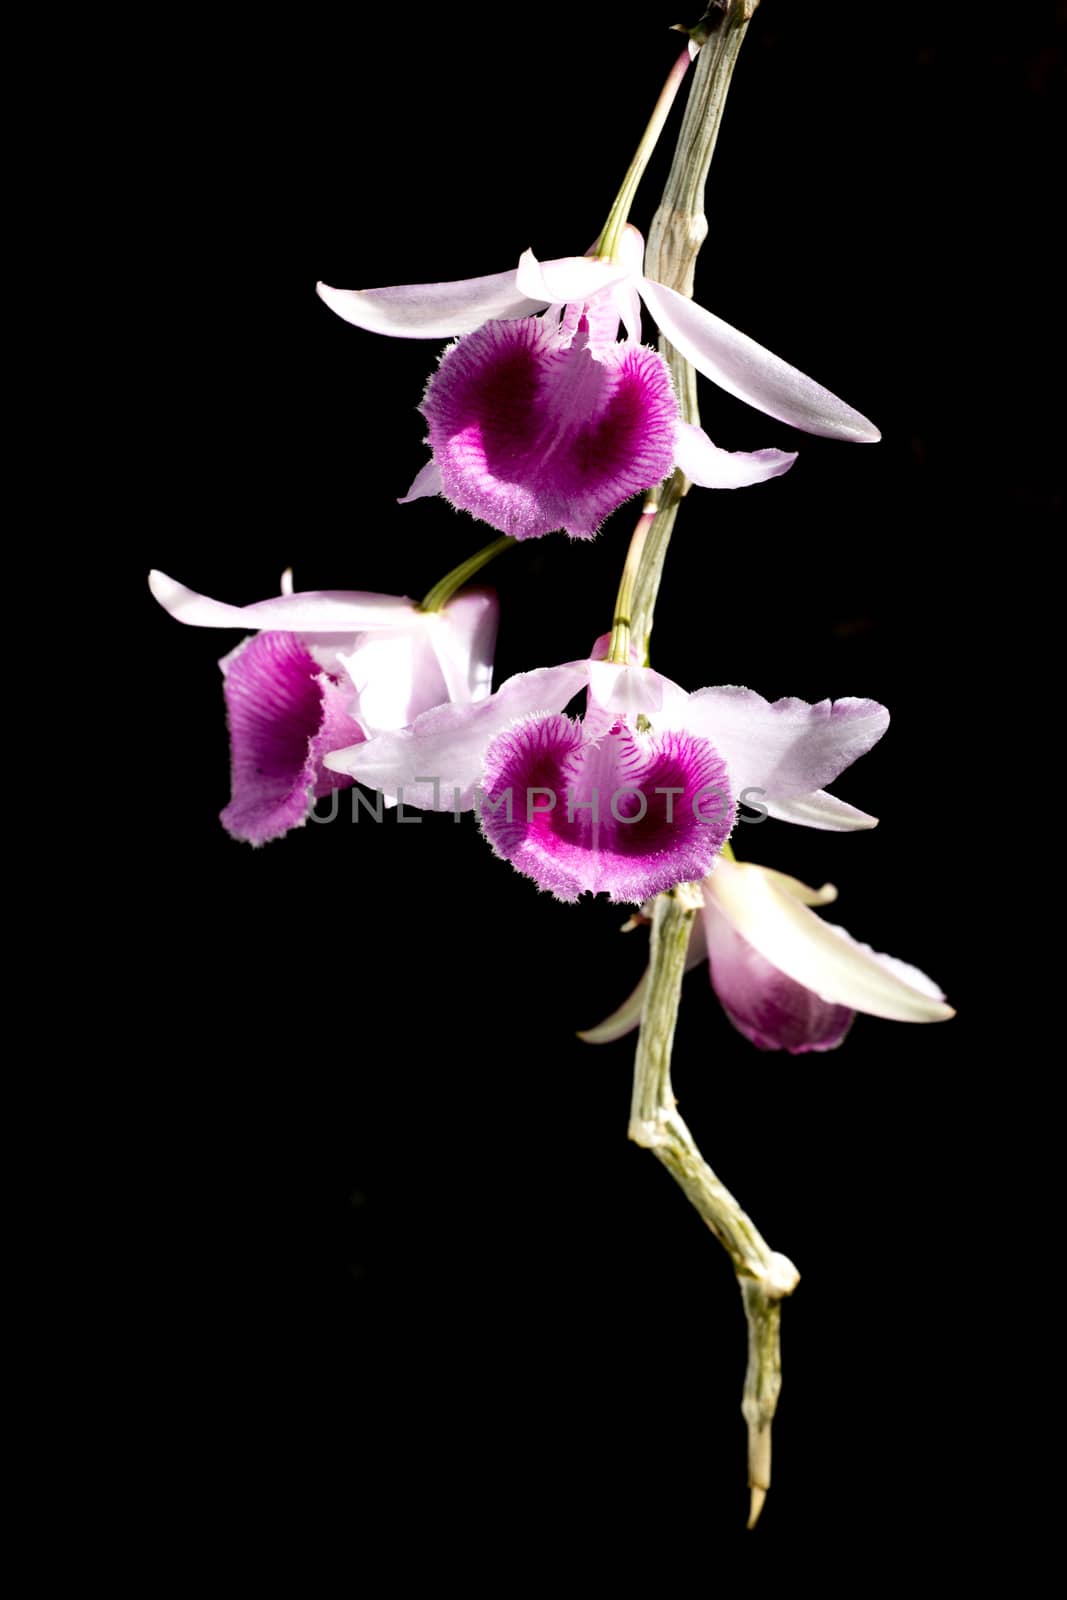 group of purple orchid on black background by wyoosumran